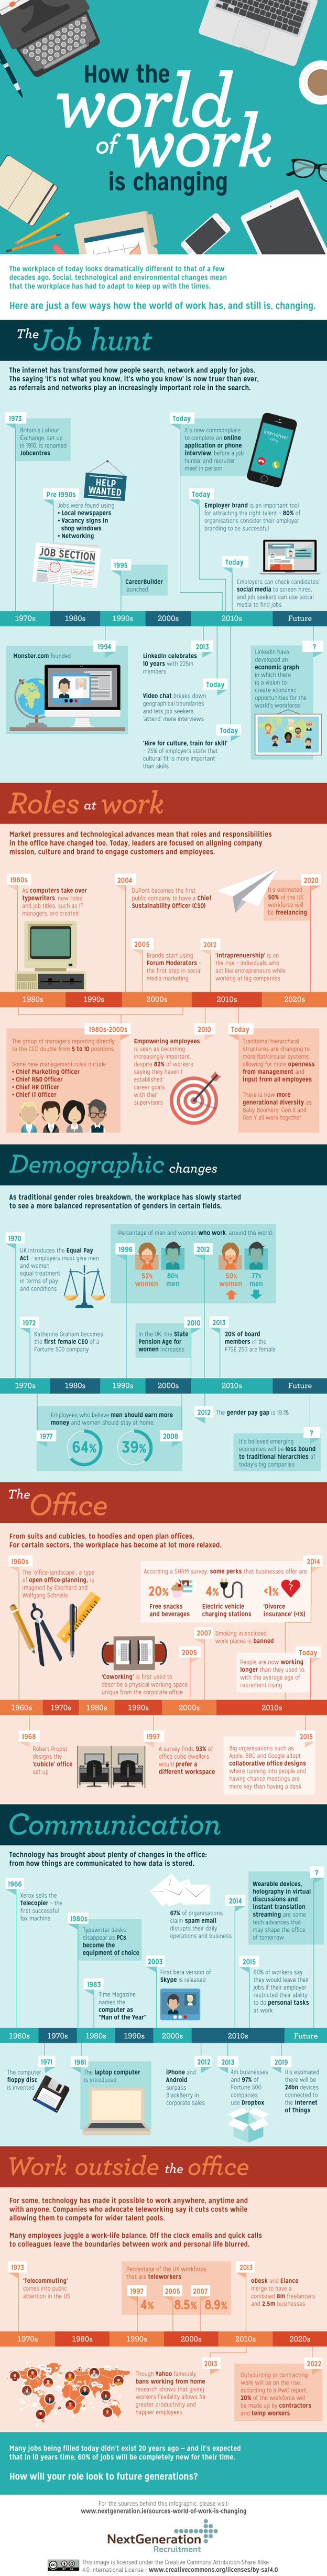 Changing workplace infographic